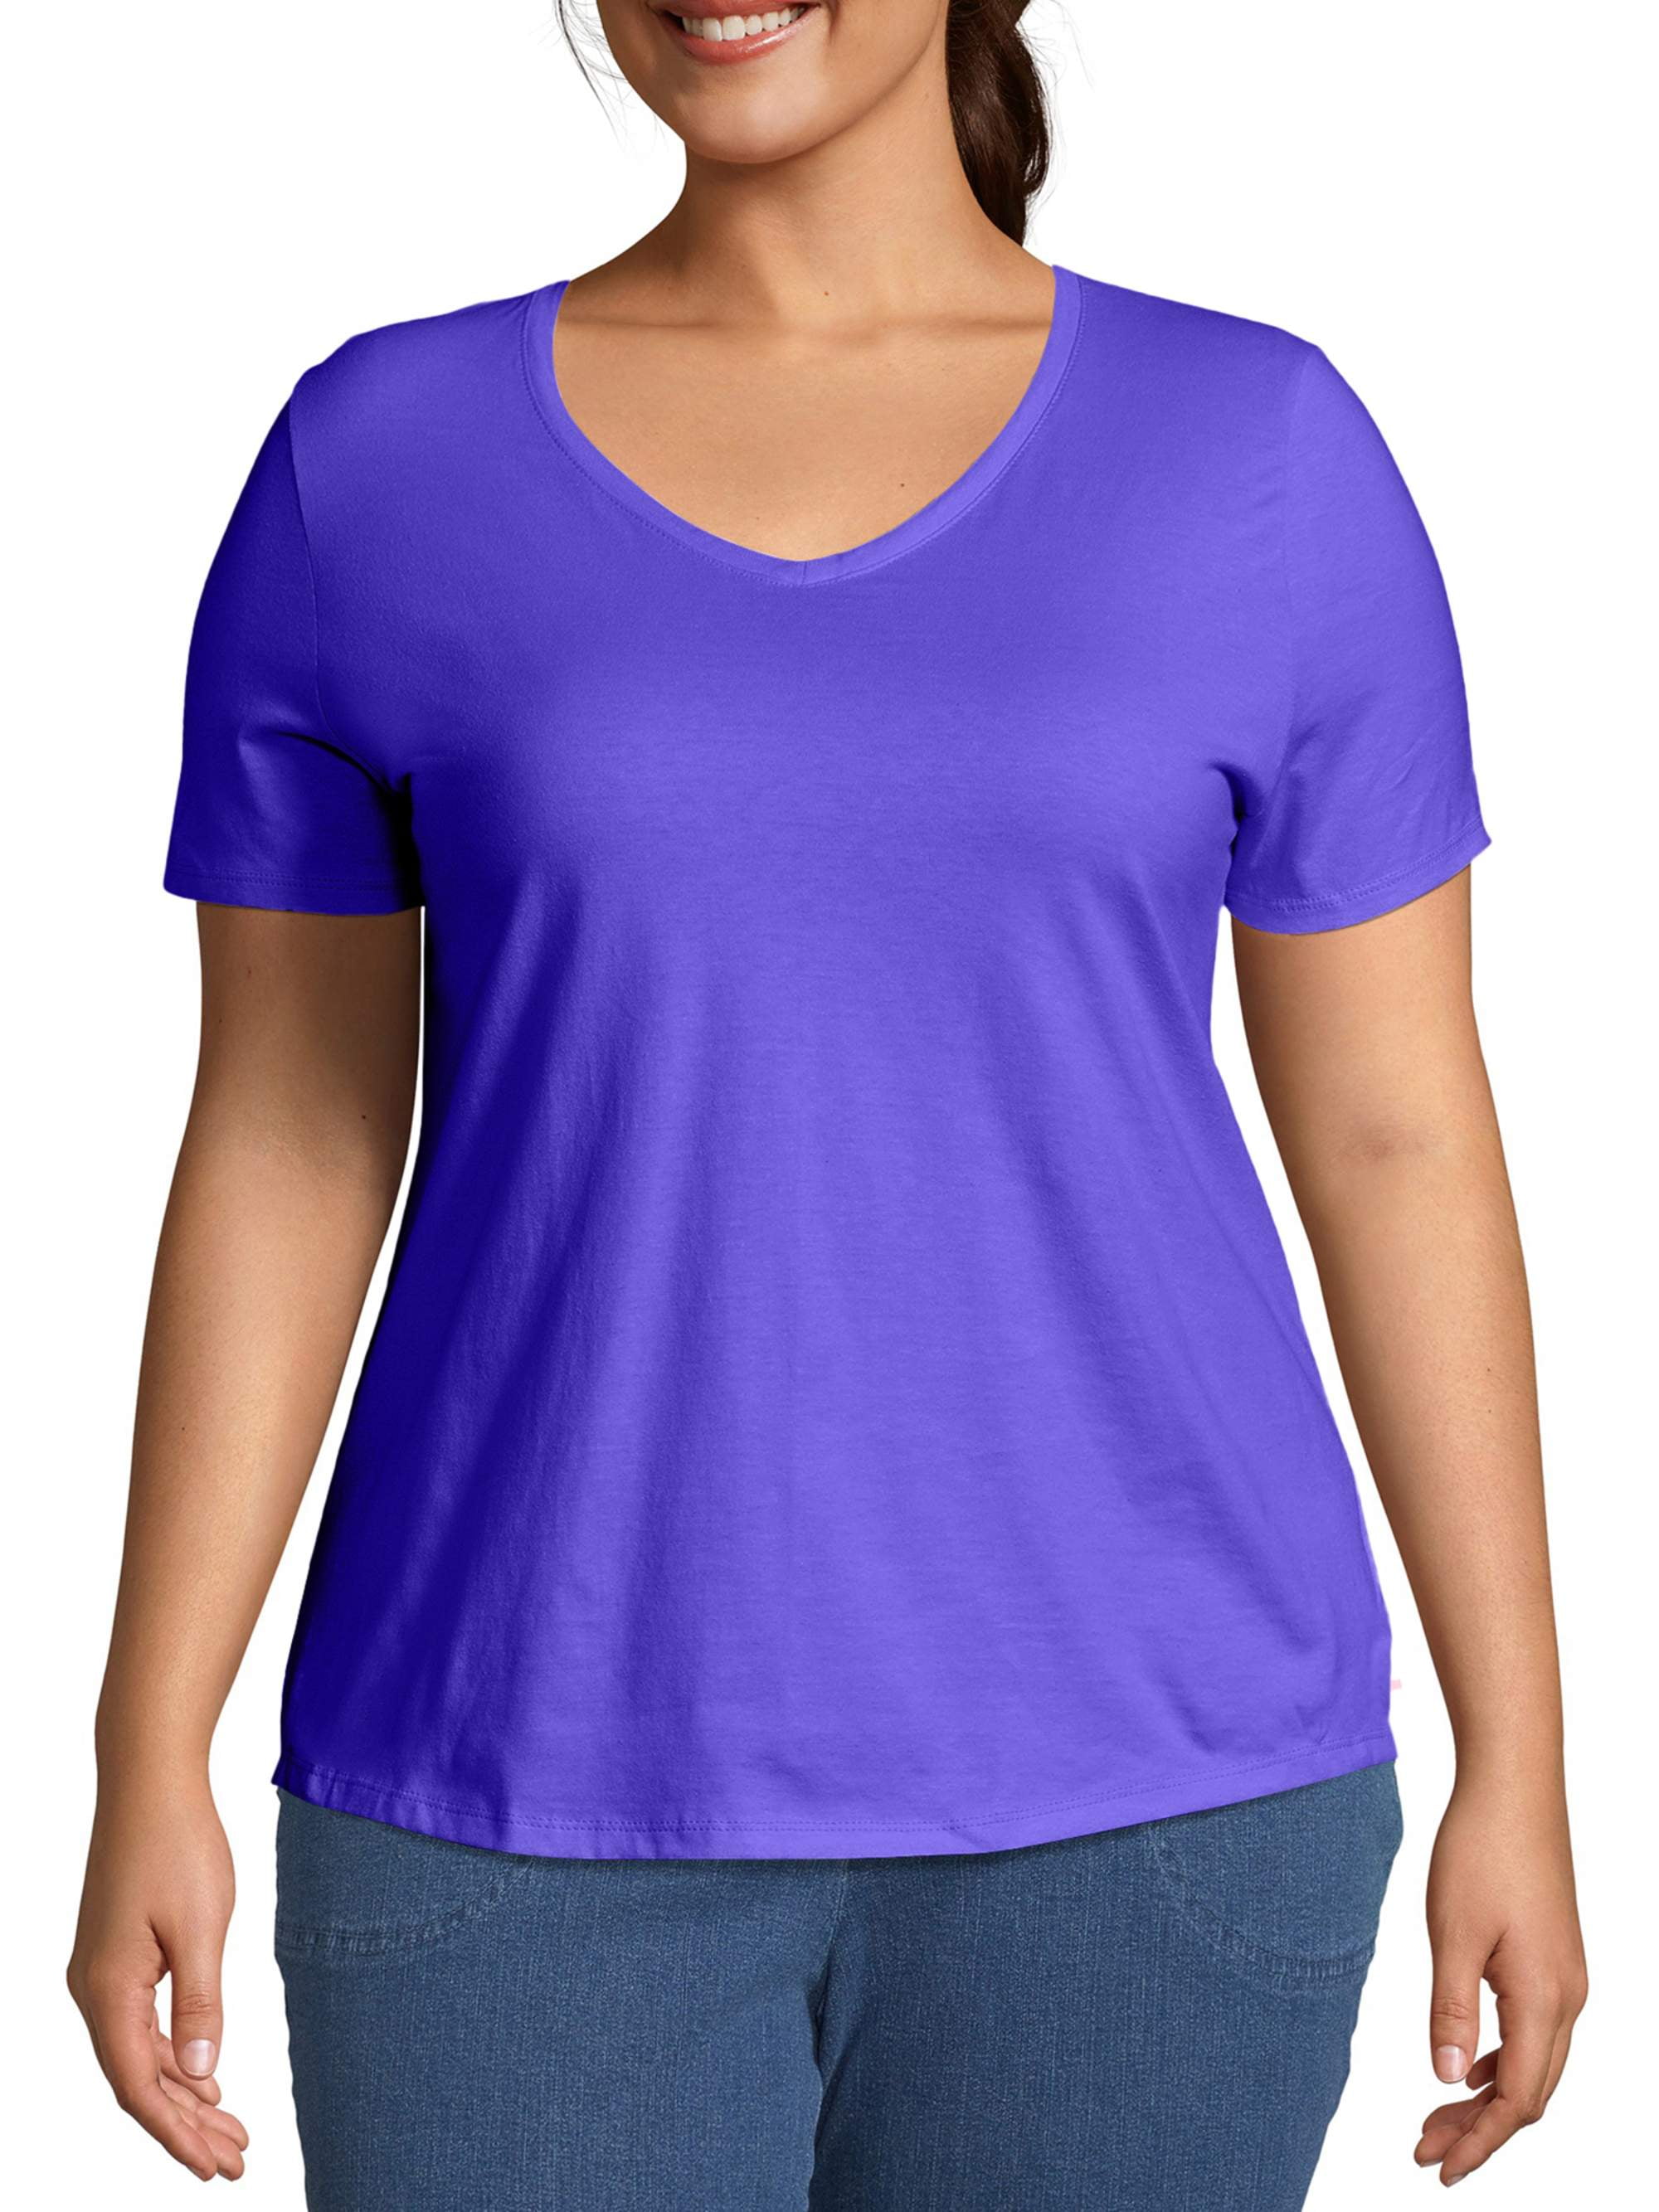 Just My Size Womens Plus Size Short Sleeve V-Neck T-Shirt 